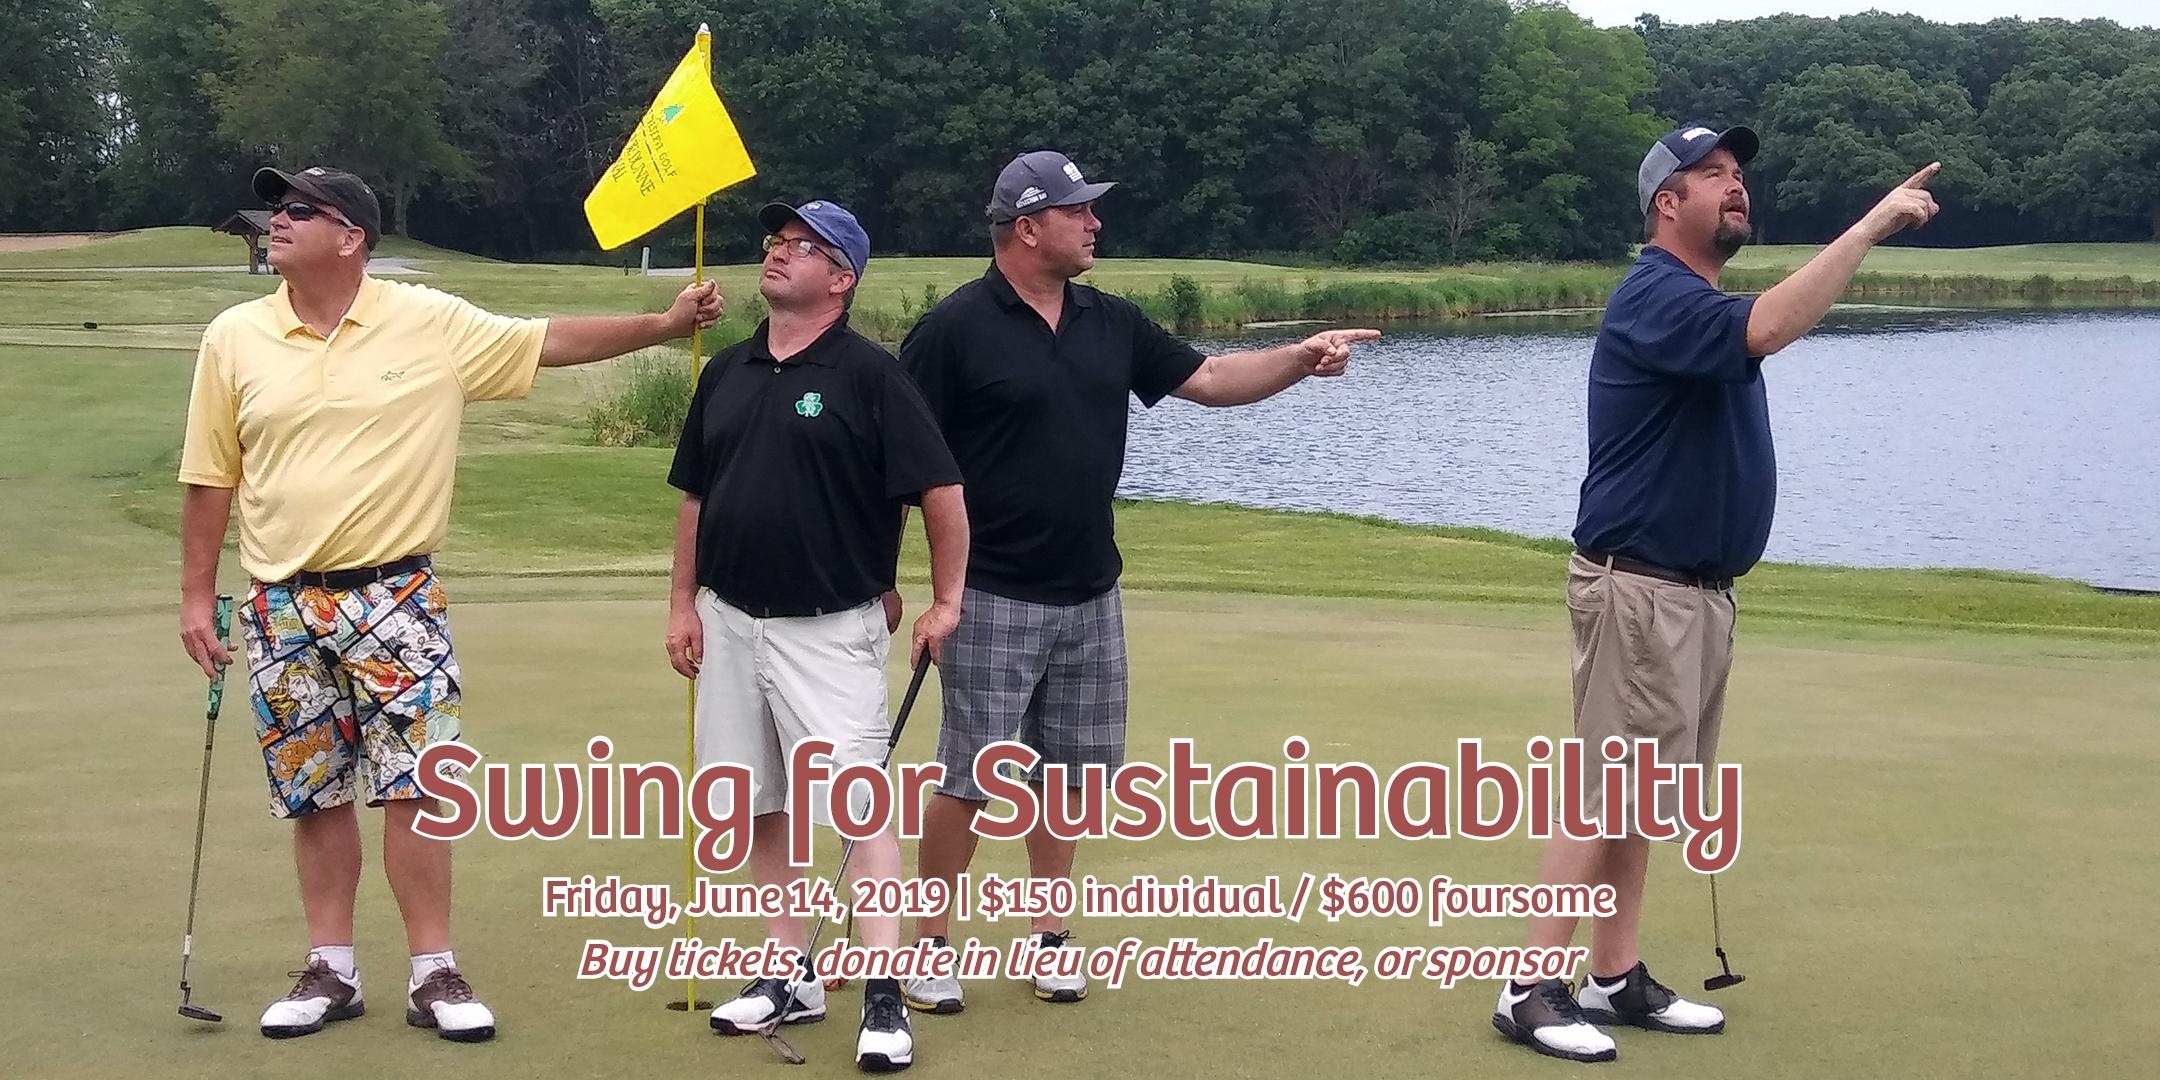 Swing for Sustainability - Annual Golf Outing